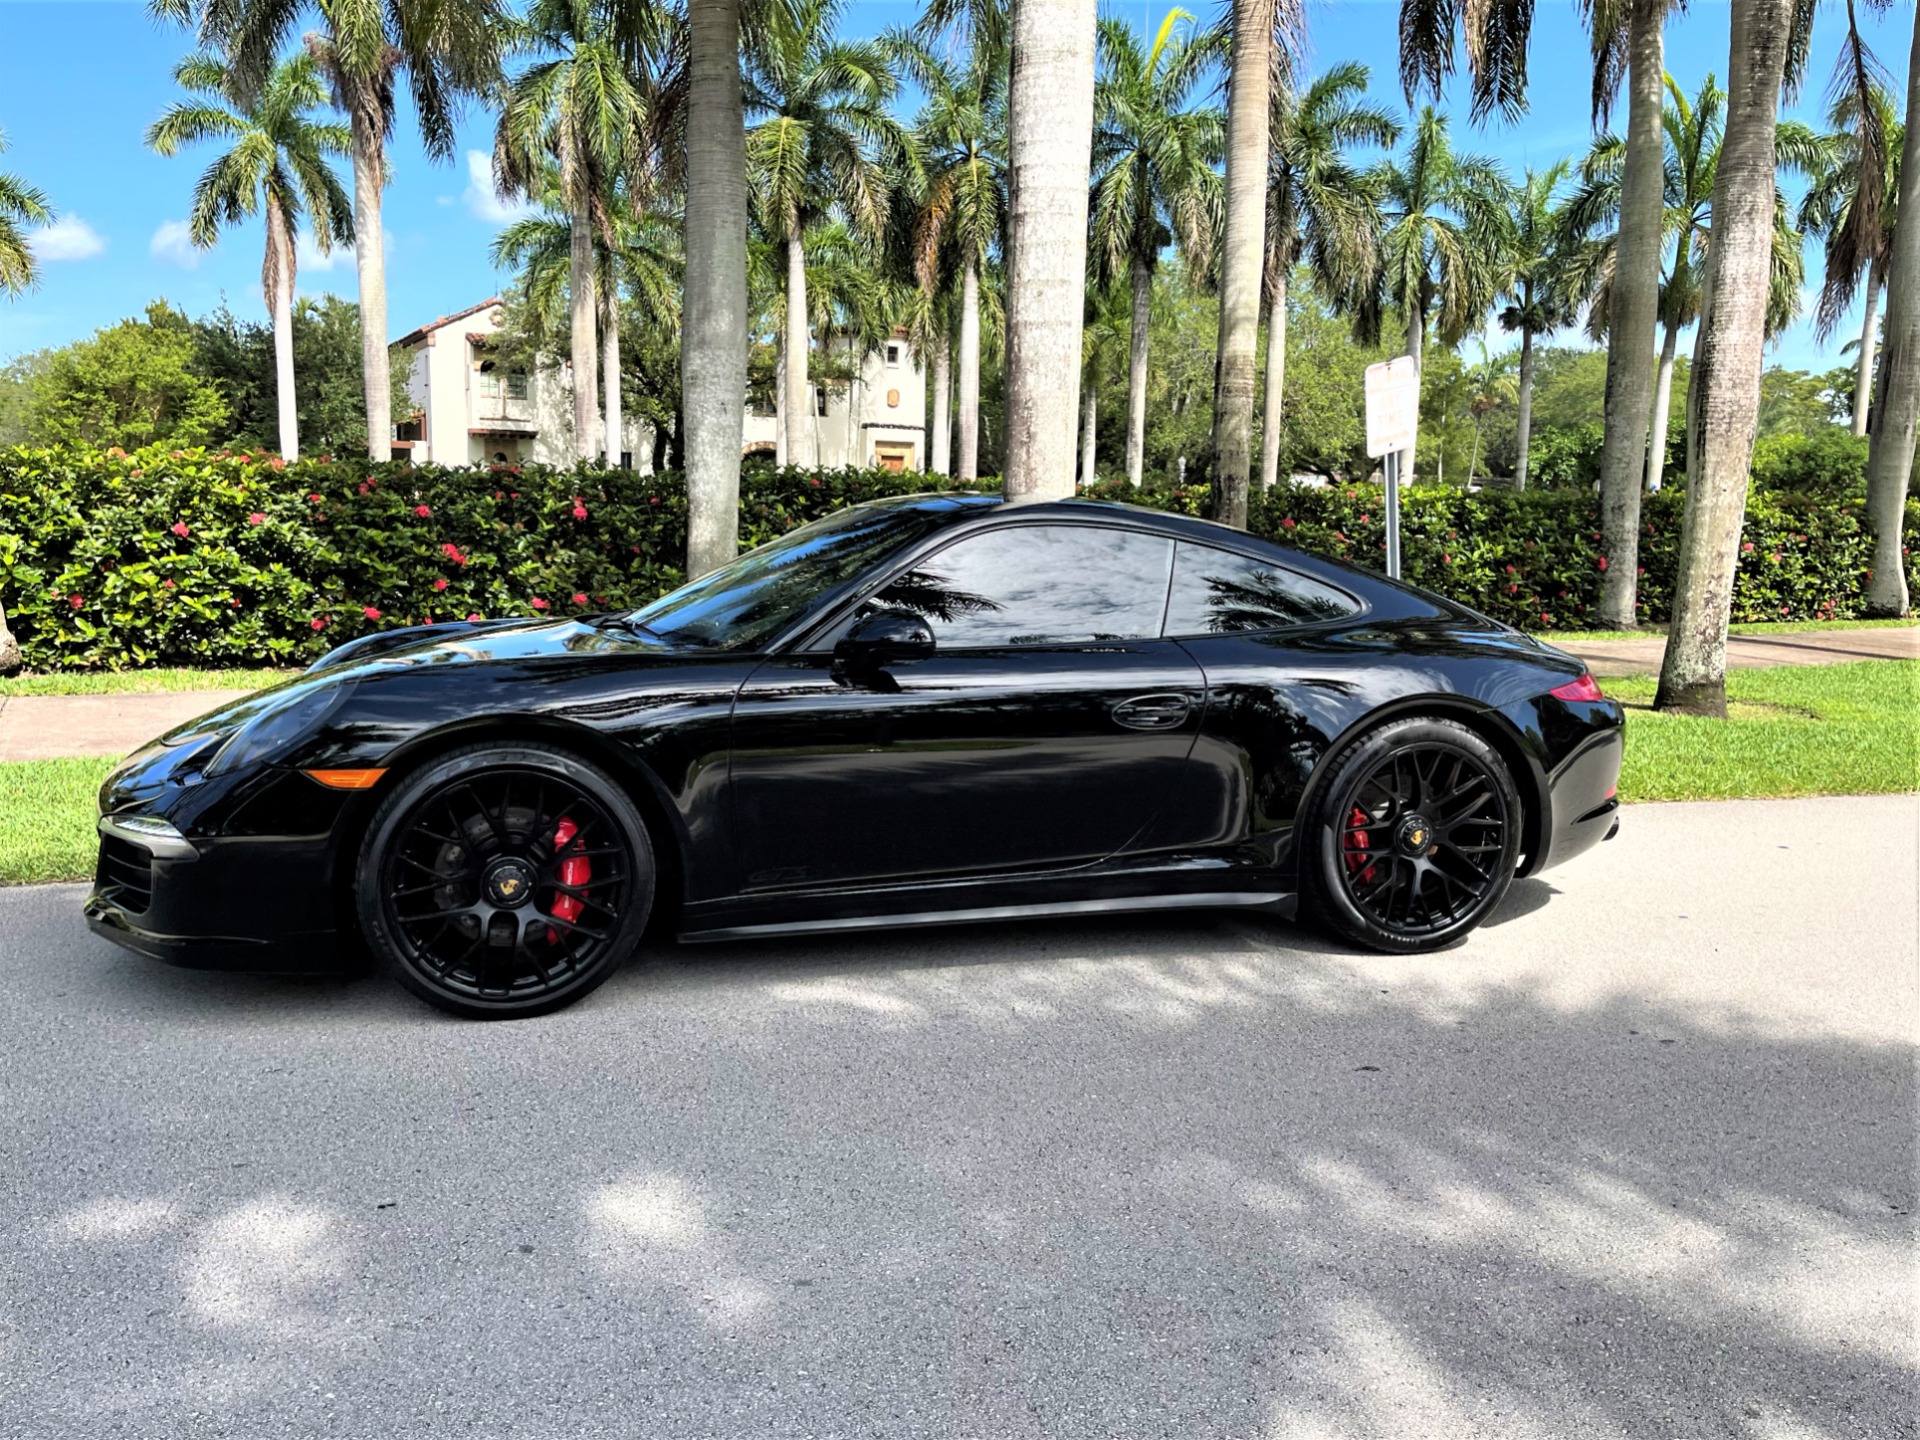 Used 2016 Porsche 911 Carrera 4 GTS for sale Sold at The Gables Sports Cars in Miami FL 33146 3